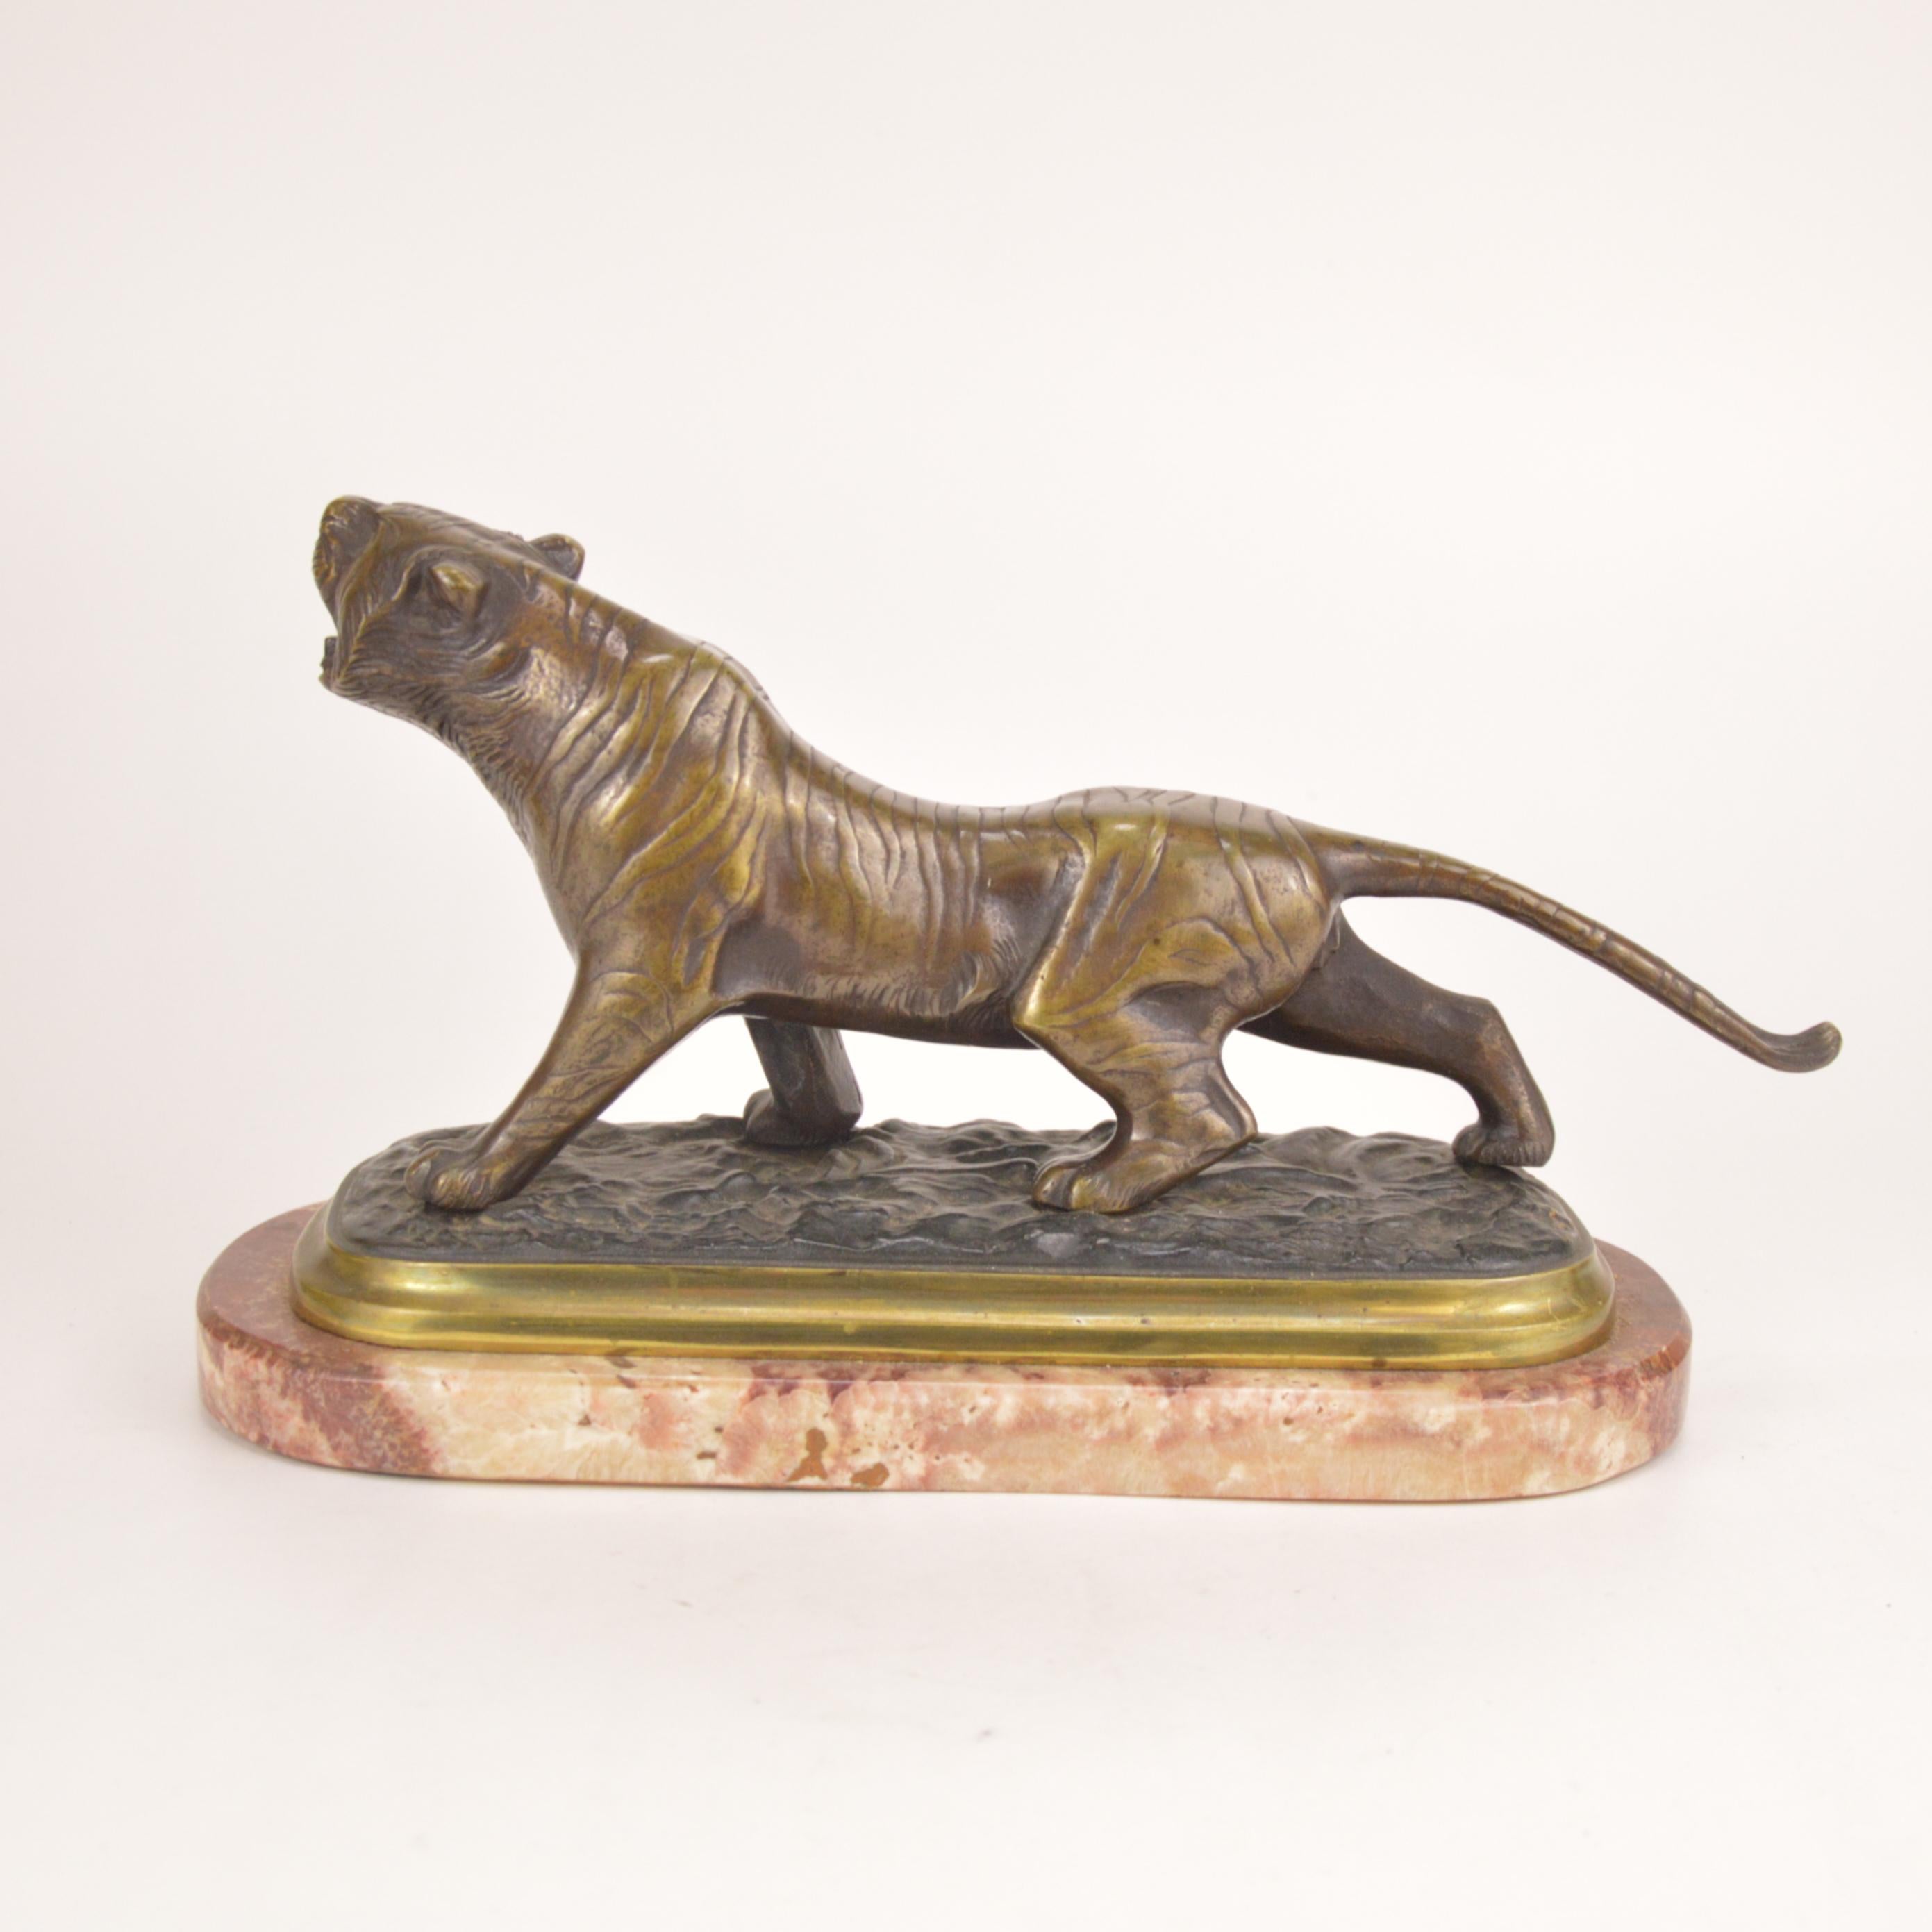 Painted Patinated Art Deco Bronze Sculpture Representing a Roaring Tiger, 20th Century